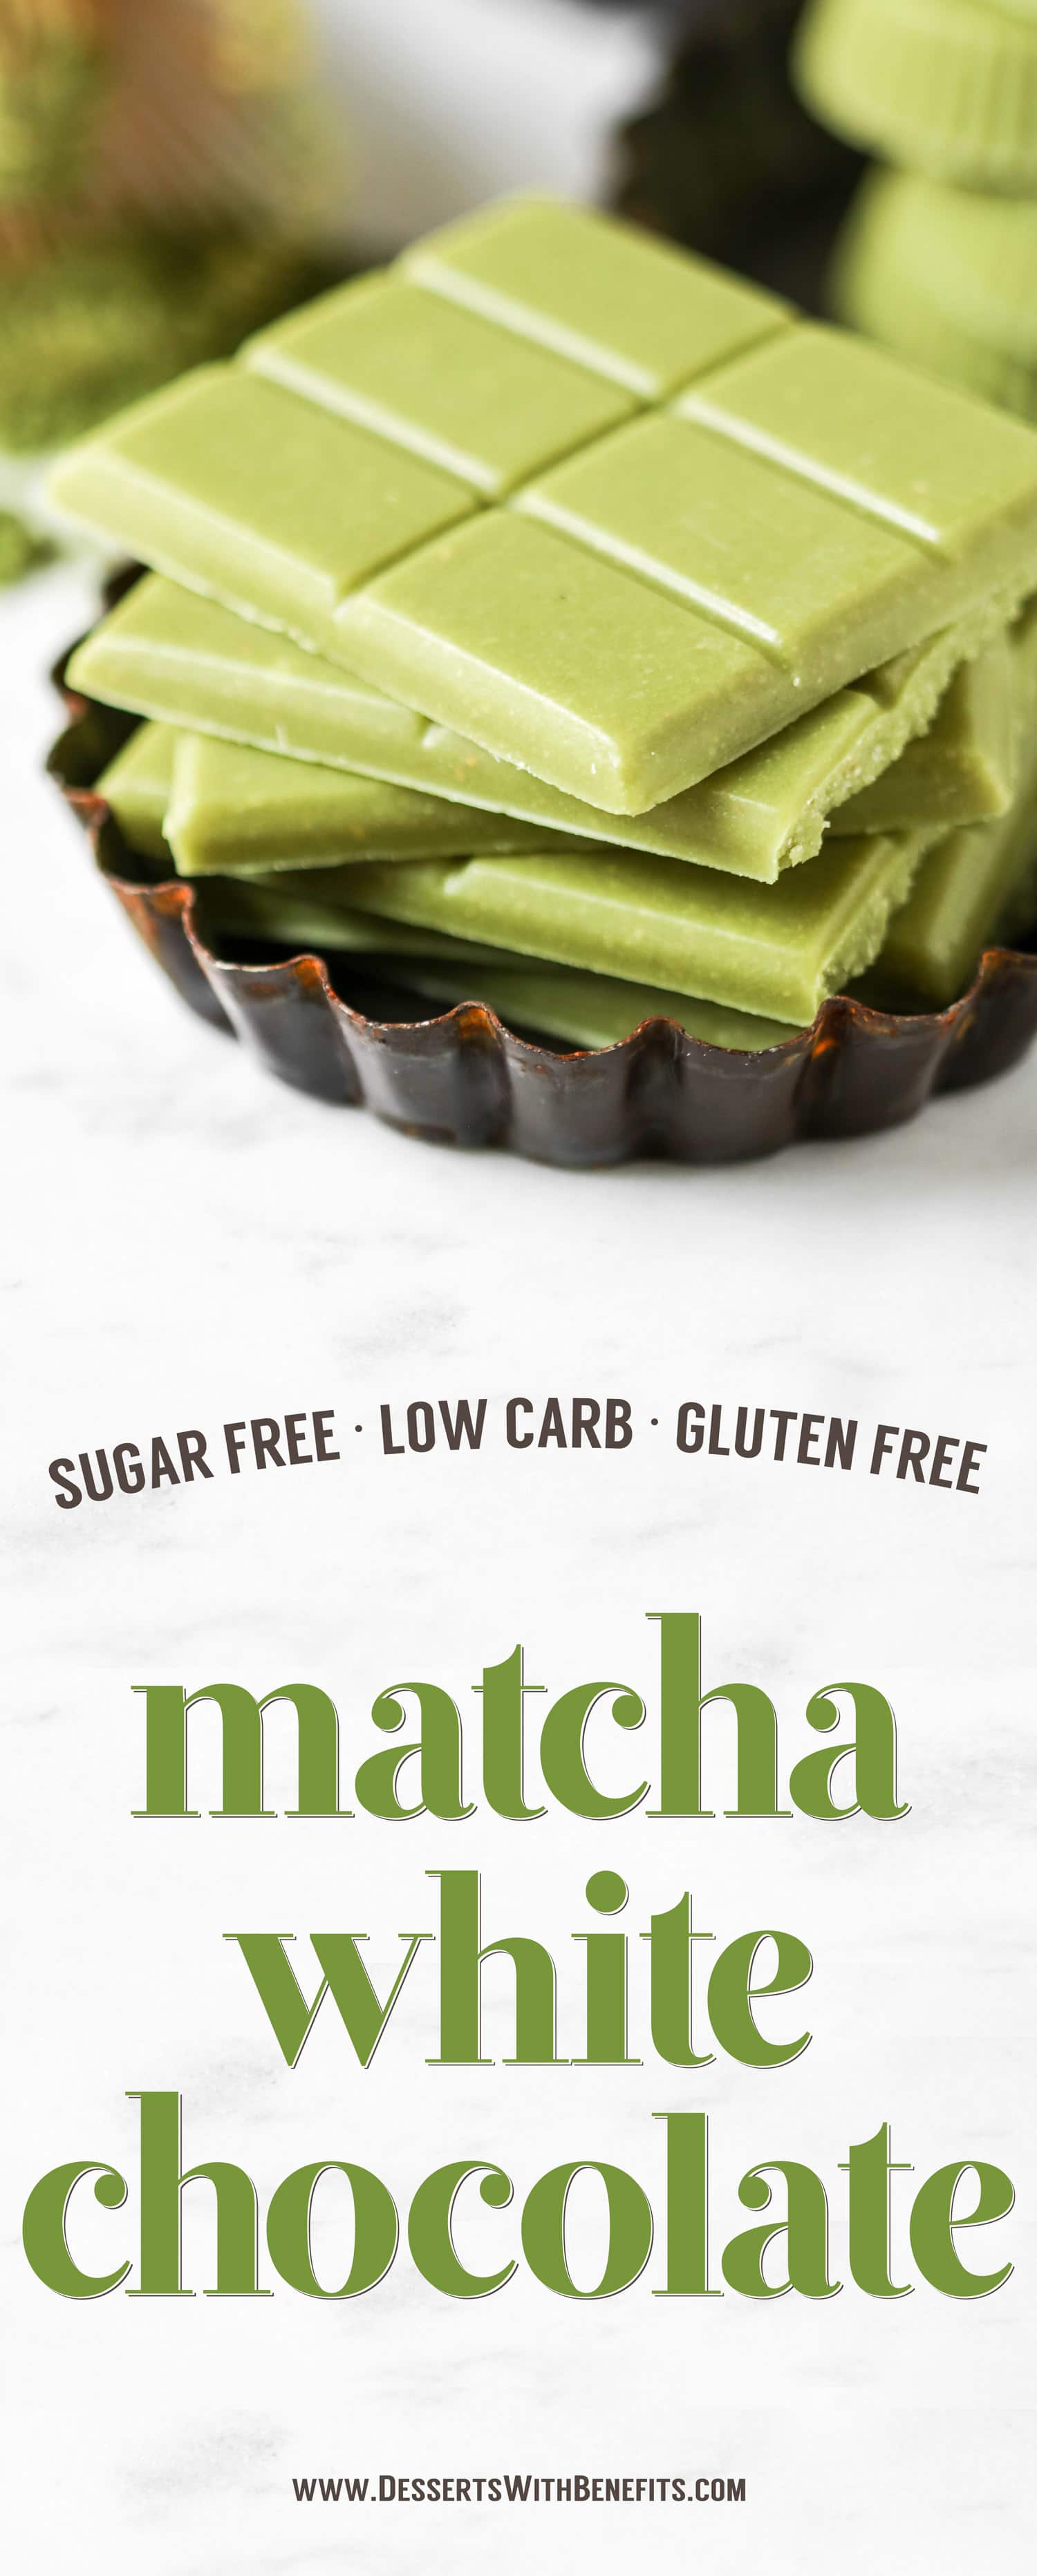 If you like matcha green tea and if you like white chocolate, combine the two and make this Matcha Green Tea White Chocolate! It's earthy from the matcha, yet sweet and delicious from the white chocolate.  This Homemade Matcha White Chocolate is the ultimate treat -- and it's secretly sugar free, low carb, and gluten free too!